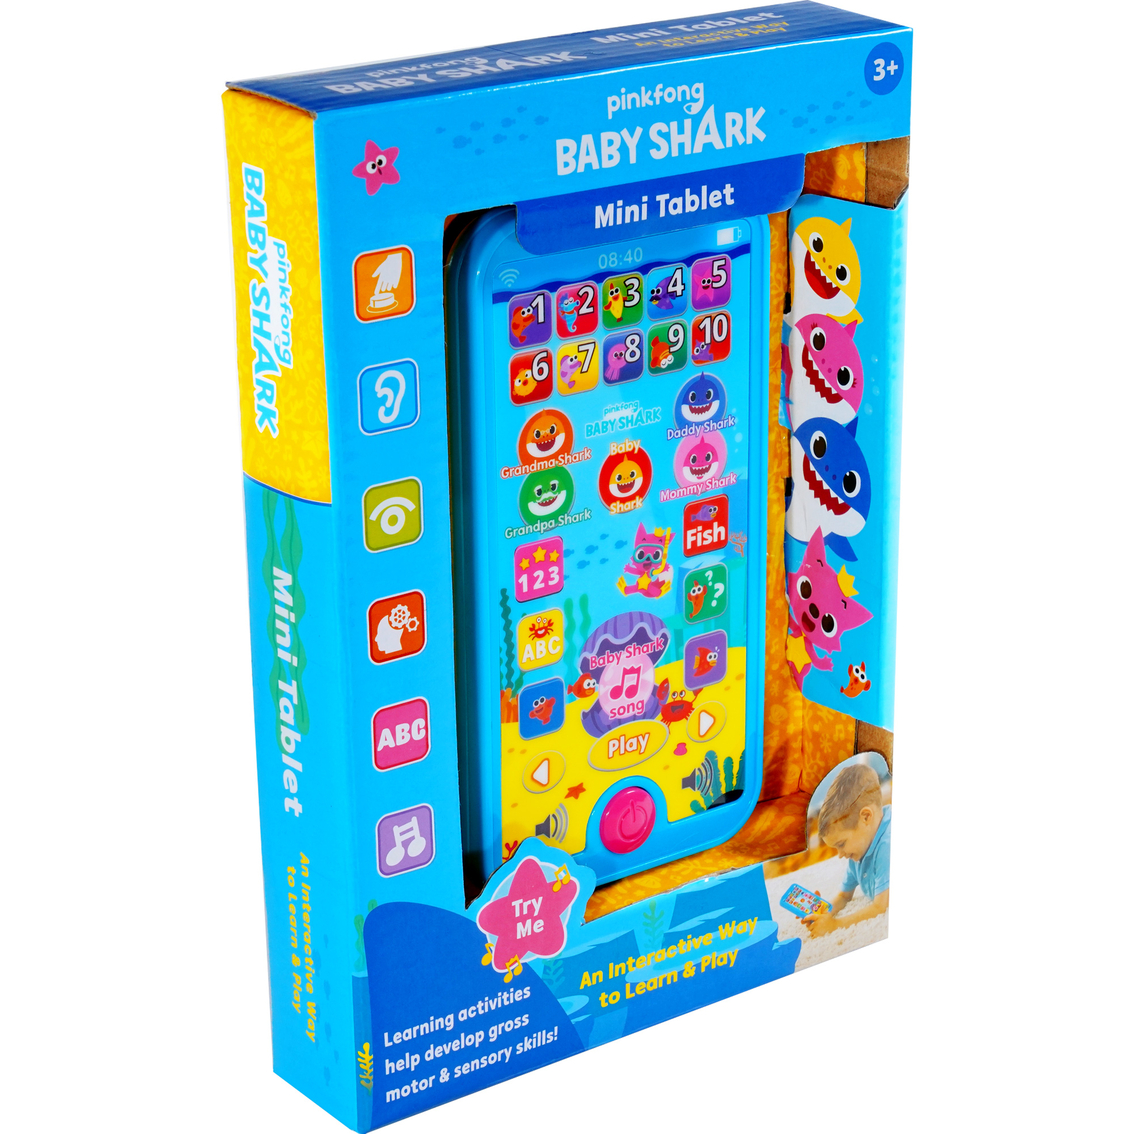 WowWee Pinkfong Baby Shark Tablet Educational Preschool Toy H6 for sale online 